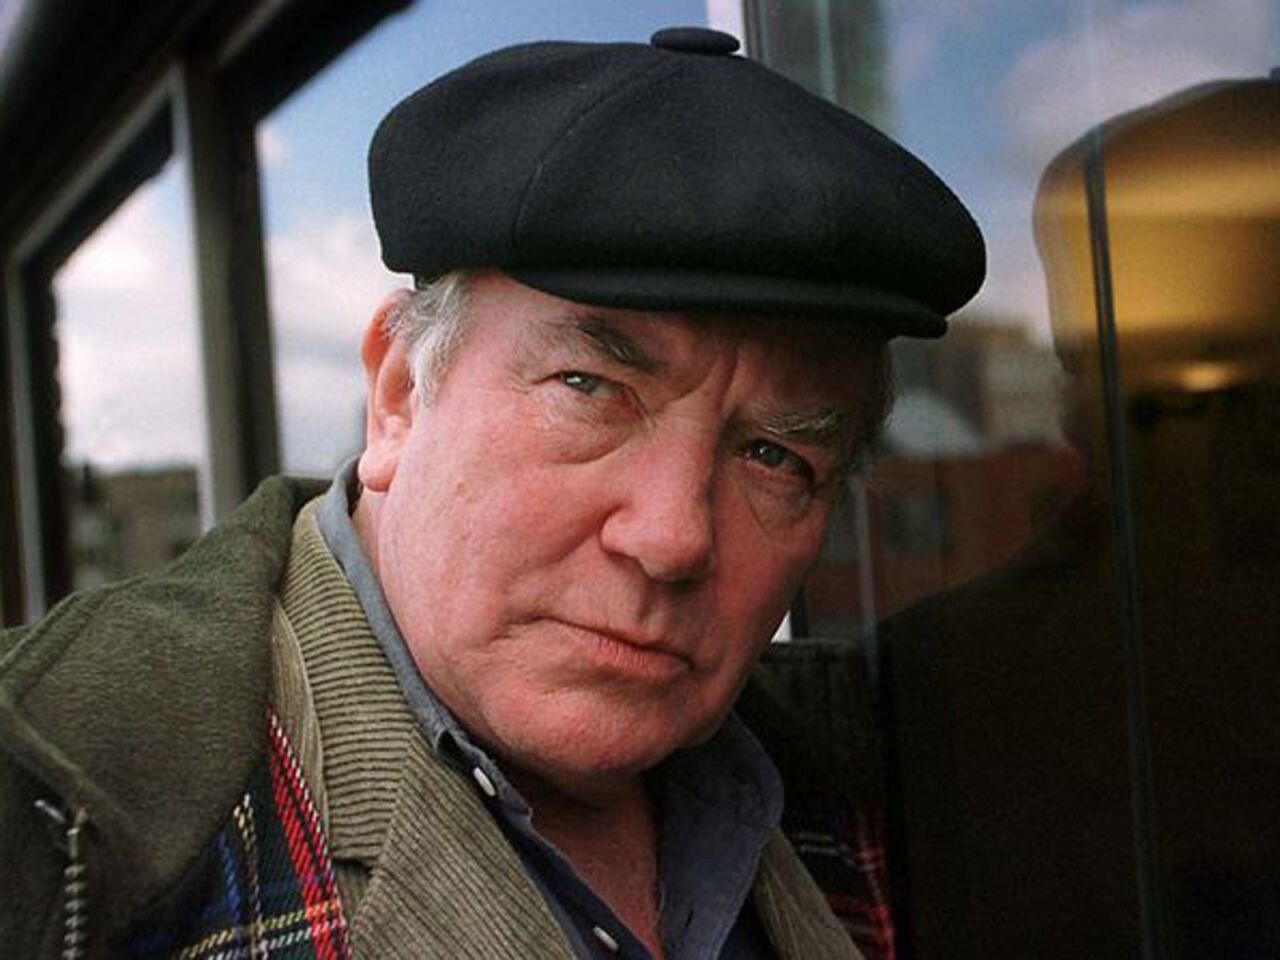 Albert Finney starred in films as diverse as "Tom Jones," "Annie" and "Skyfall." One of the most versatile actors of his generation, he played an array of roles, including Winston Churchill, Pope John Paul II, a southern American lawyer and an Irish gangster. He was 82.